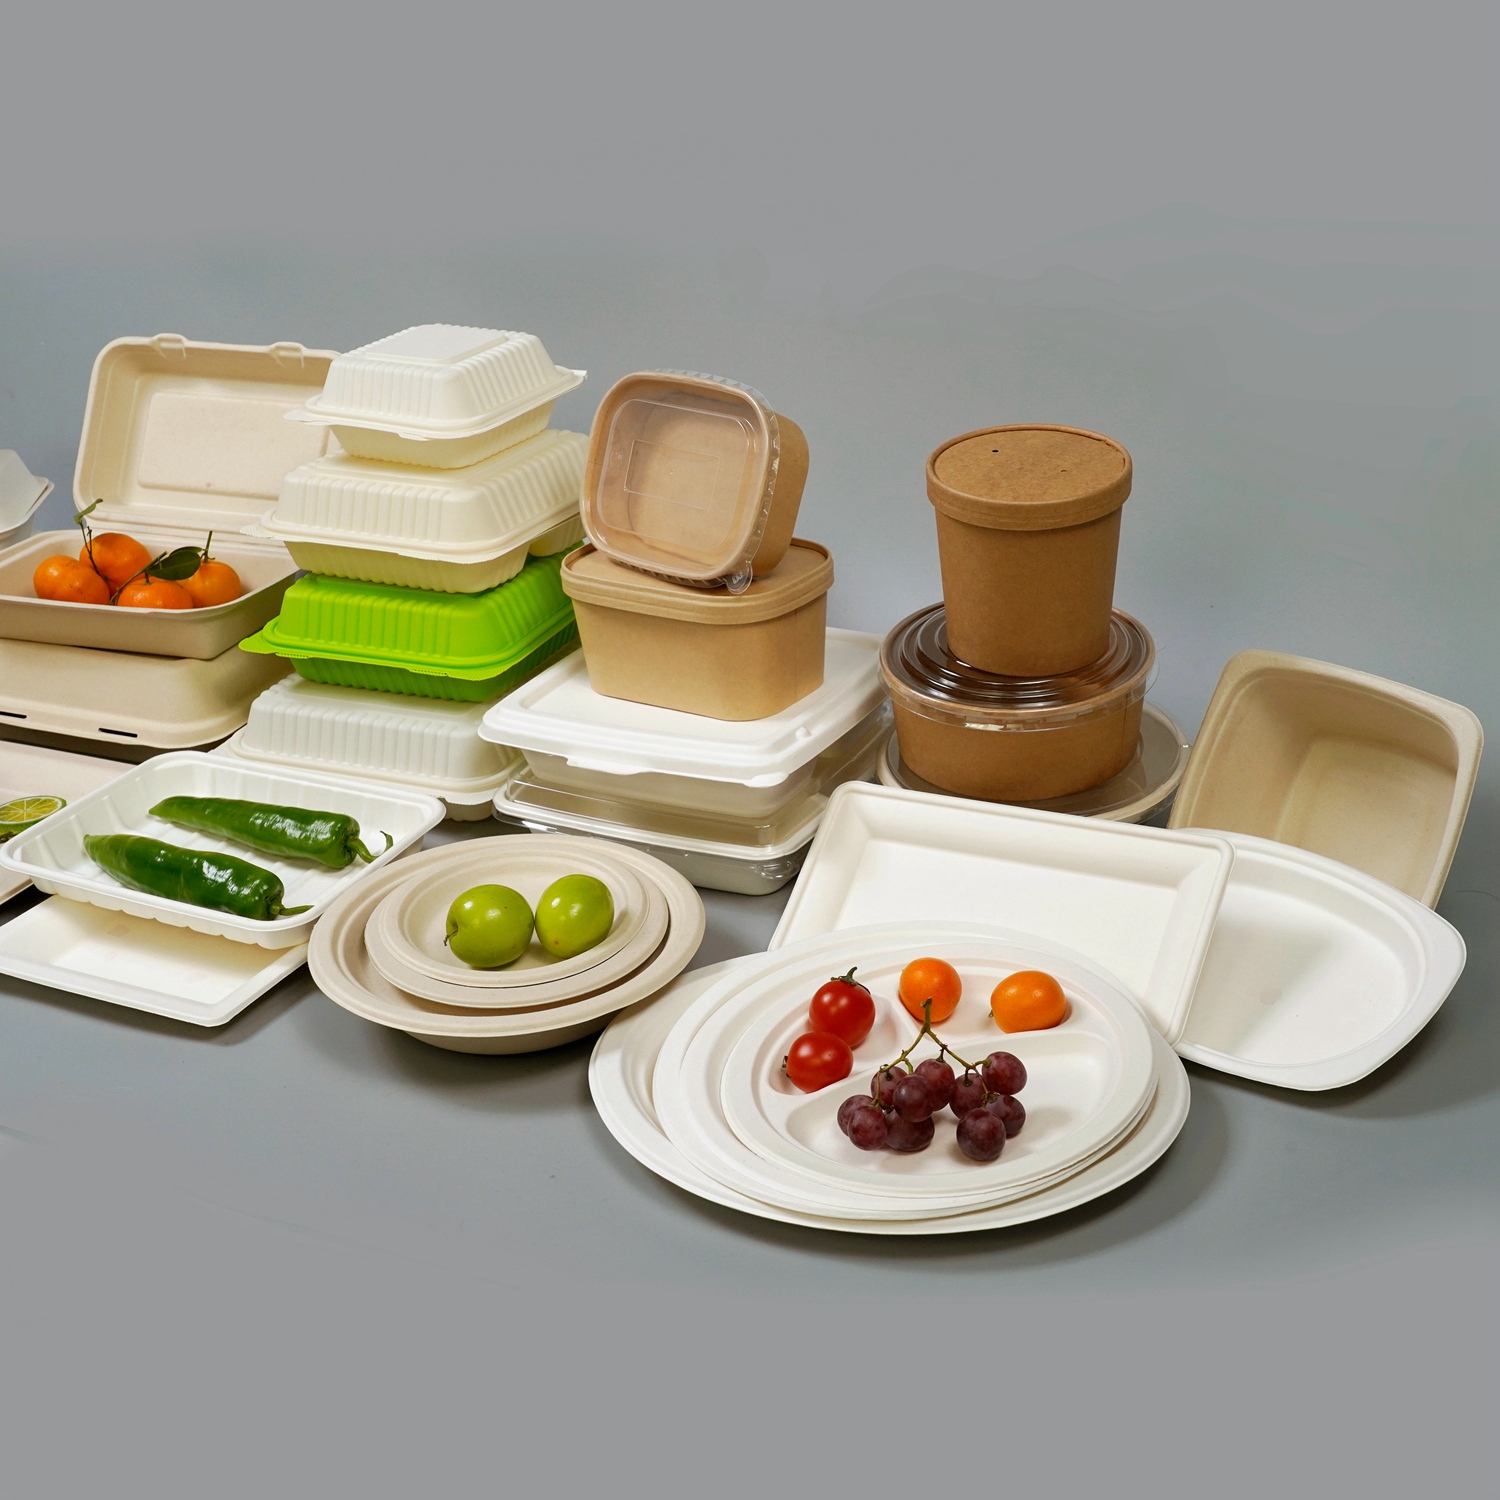 What is the reason why disposable environmentally friendly degradable tableware has not been popularized?